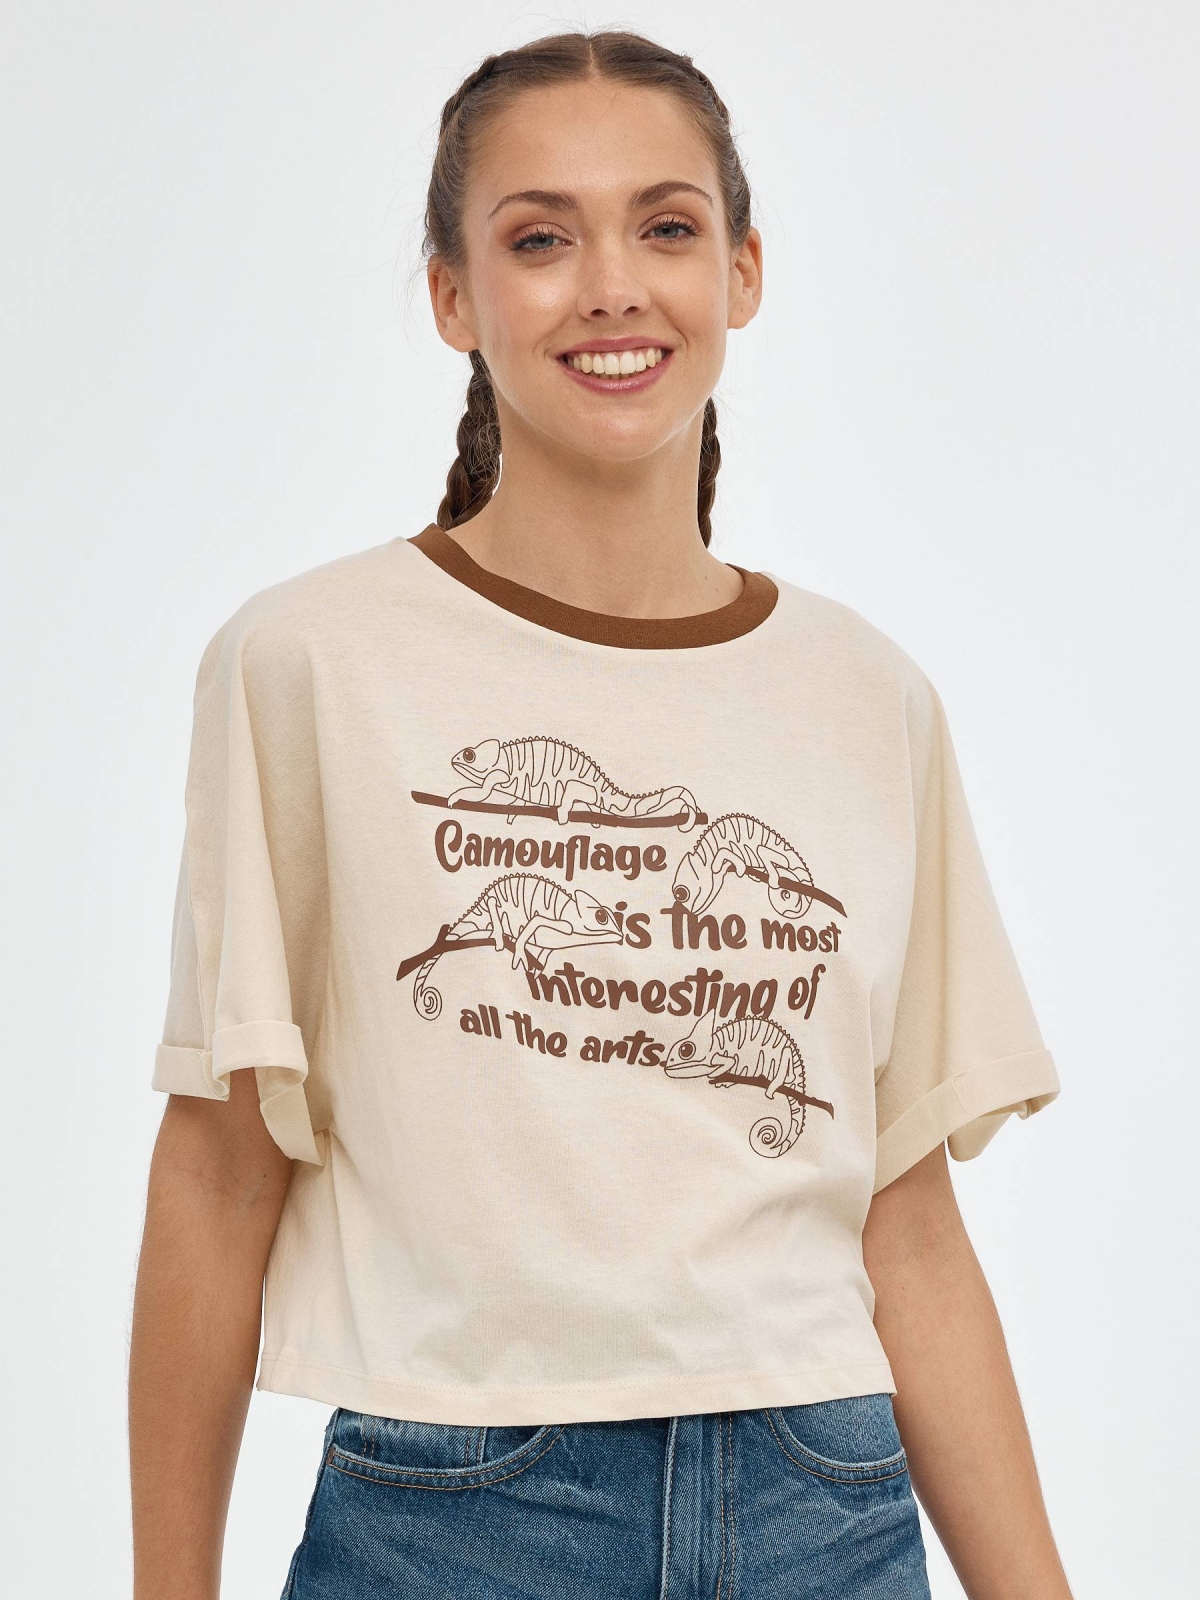 Chameleon crop top sand middle front view